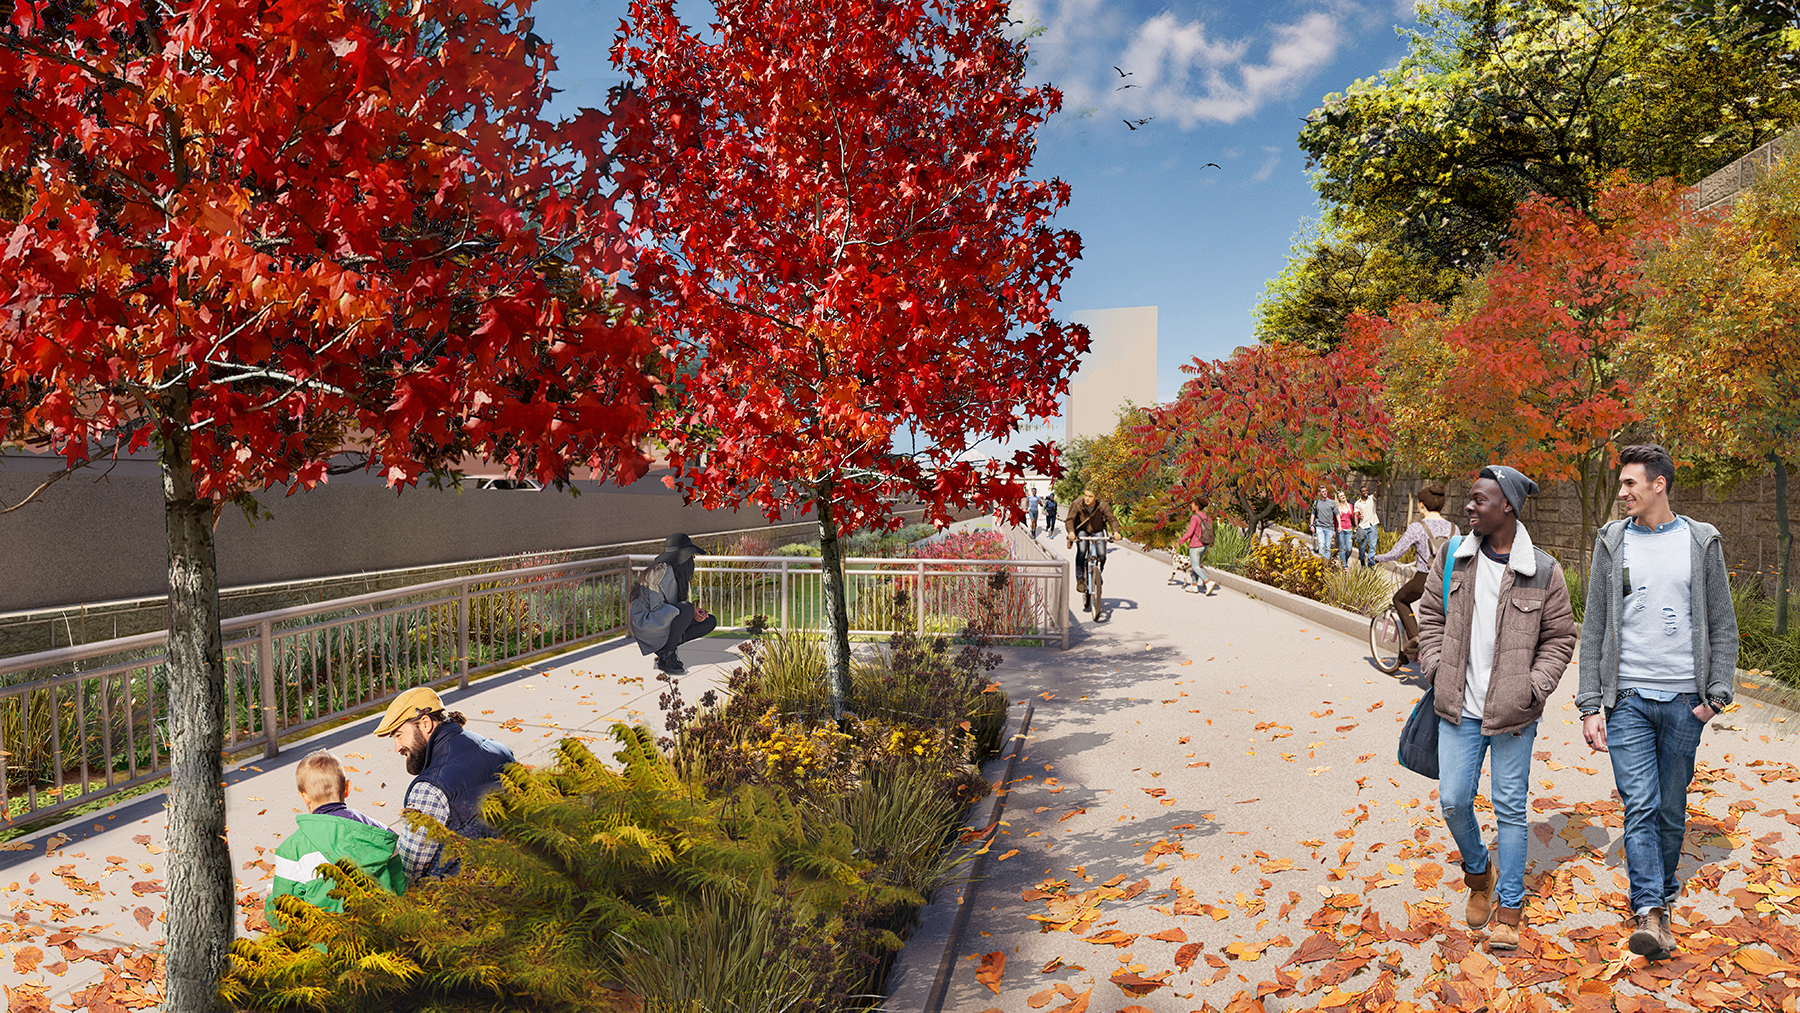 This rendering shows a planned segment of the restored Tibbetts Brook and the extended Putnam Greenway within the existing right of way that New York City has agreed to purchase from CSX. The view is looking south near West 239th Street in the Bronx. (Image courtesy of the New York City Department of Environmental Protection)